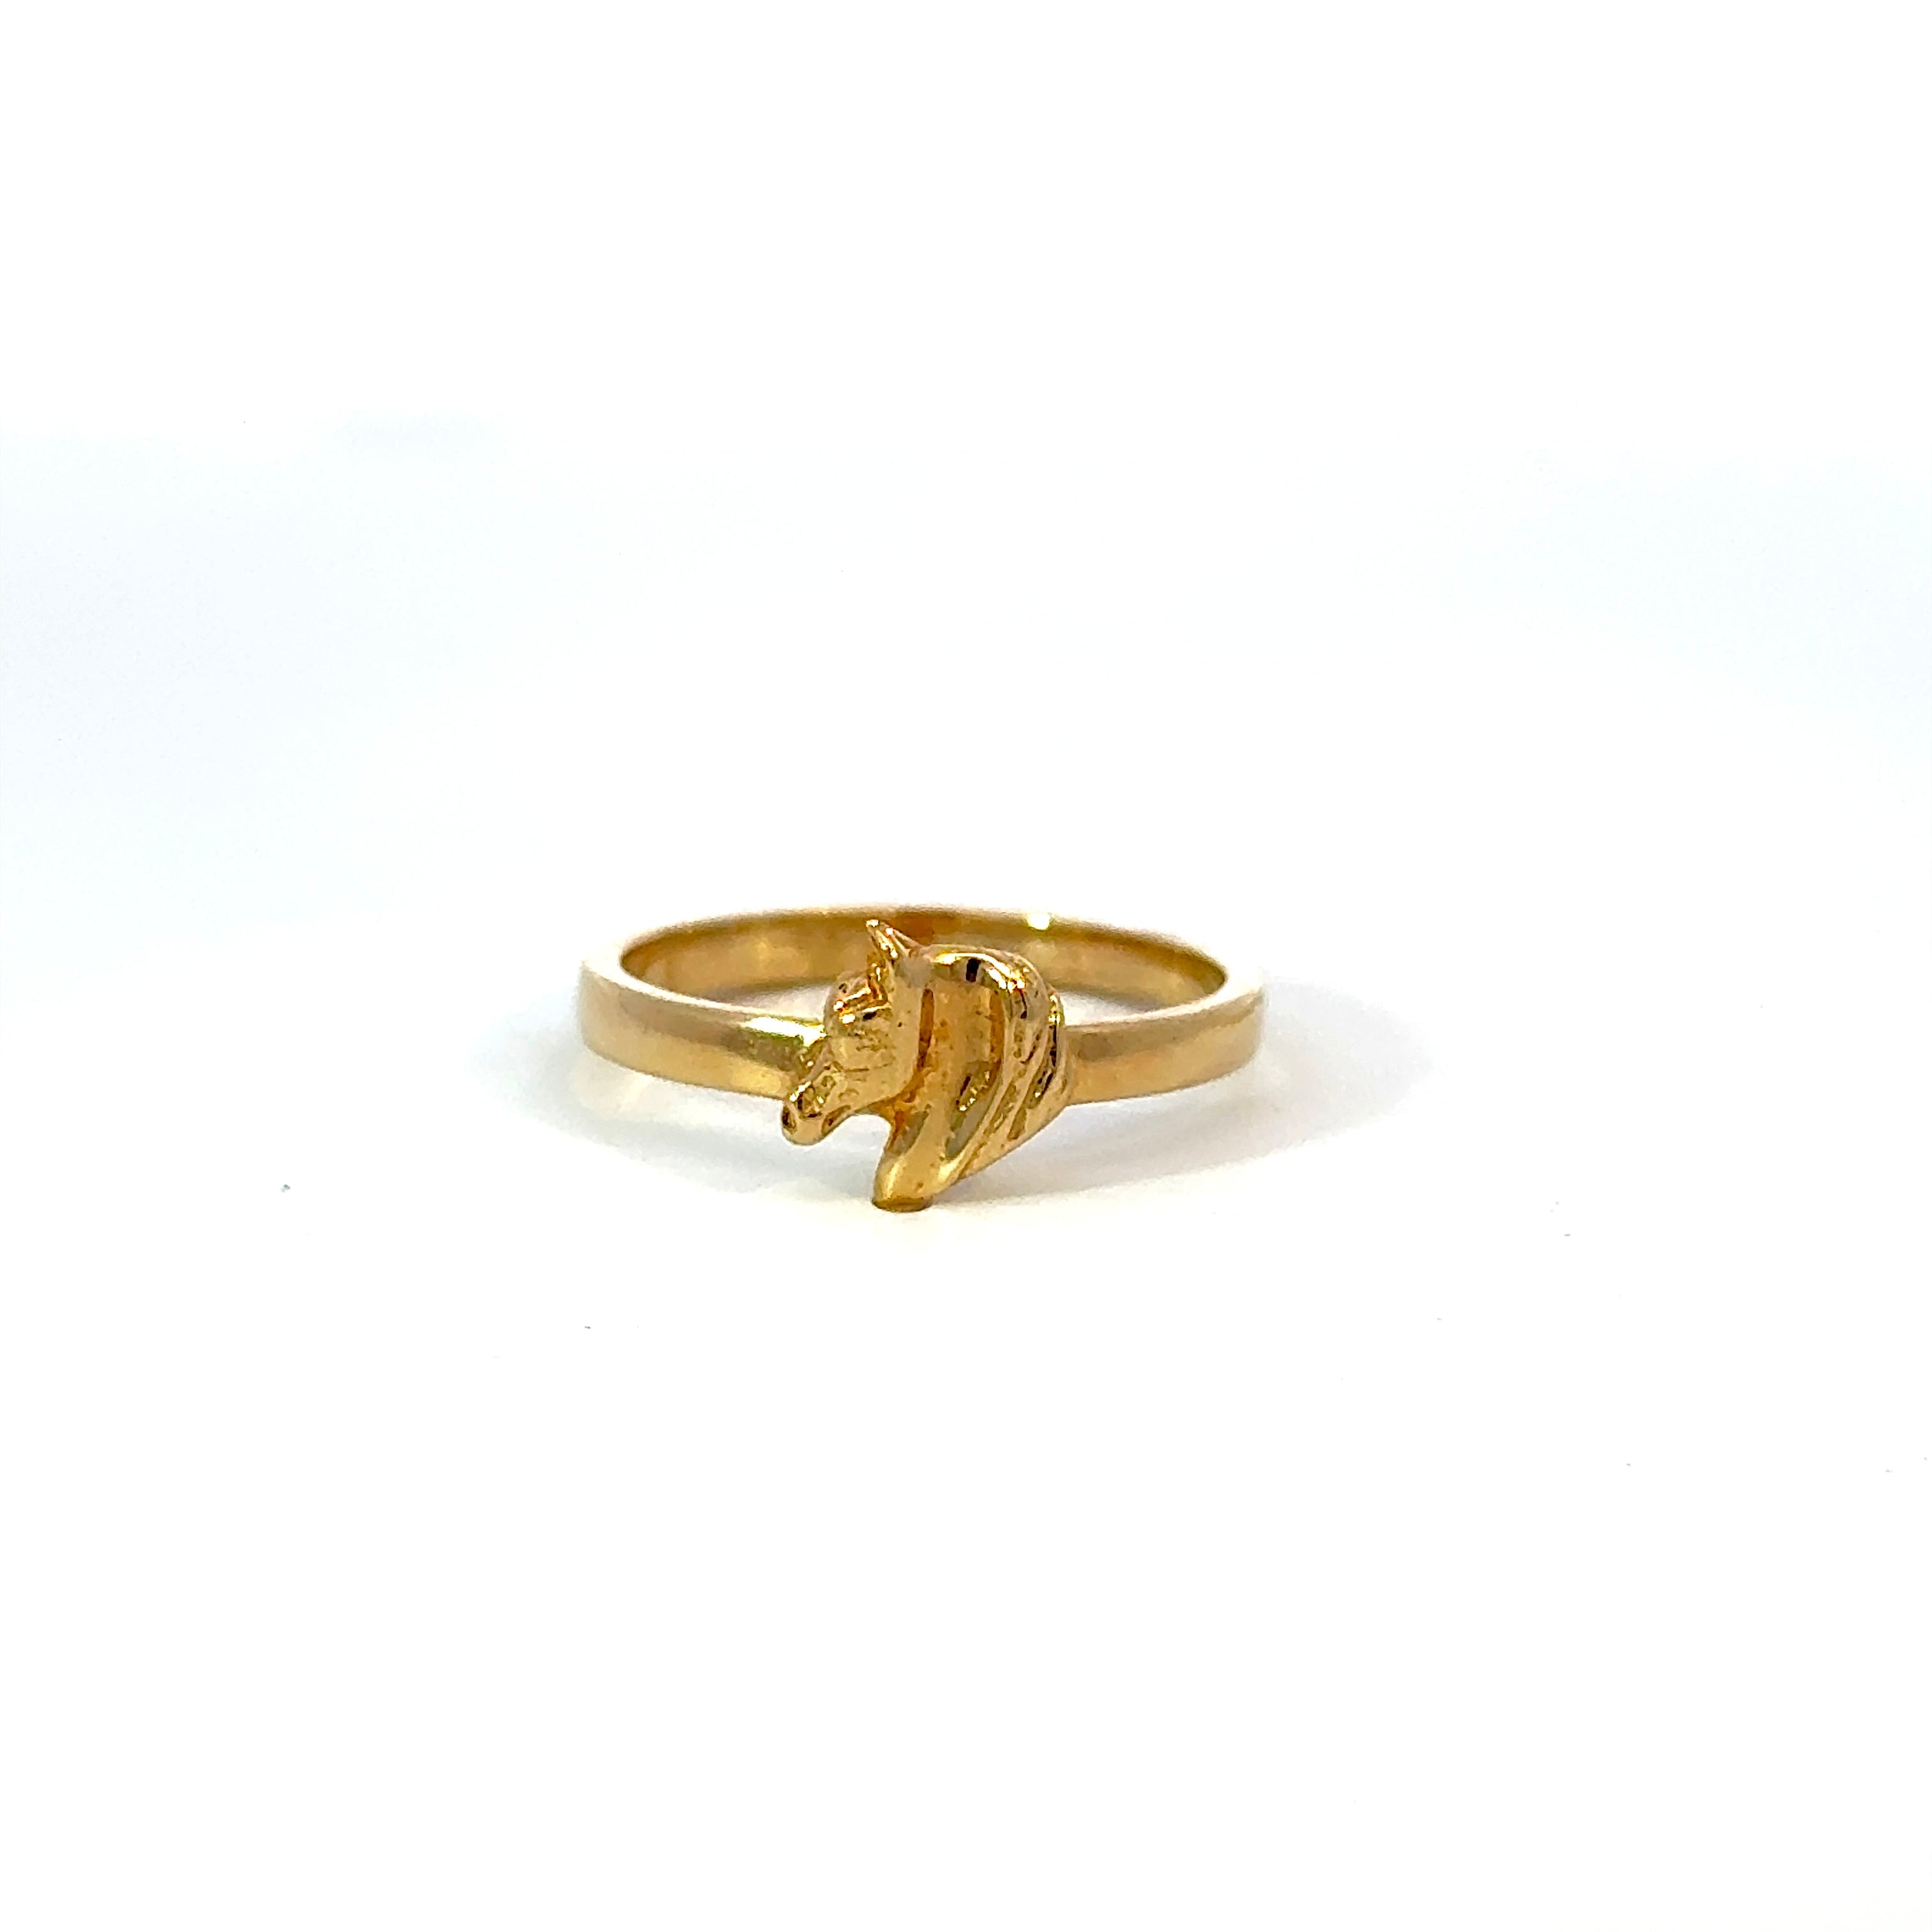 Vintage Horse Head Ring in 14K Yellow Gold